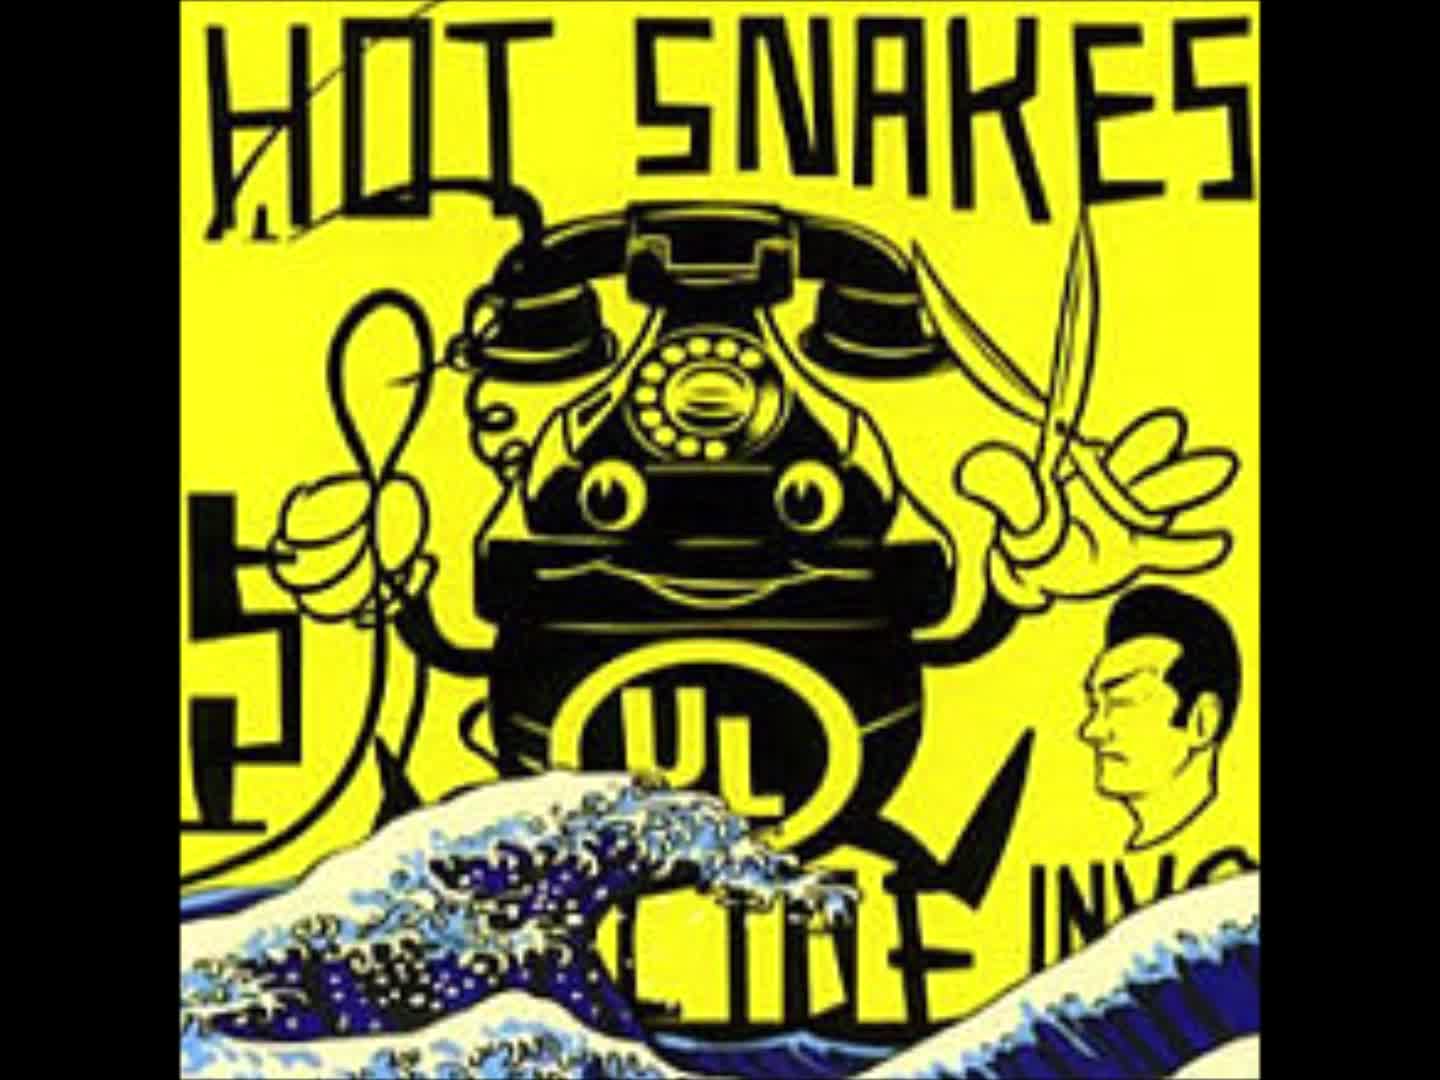 Hot Snakes - Who Died